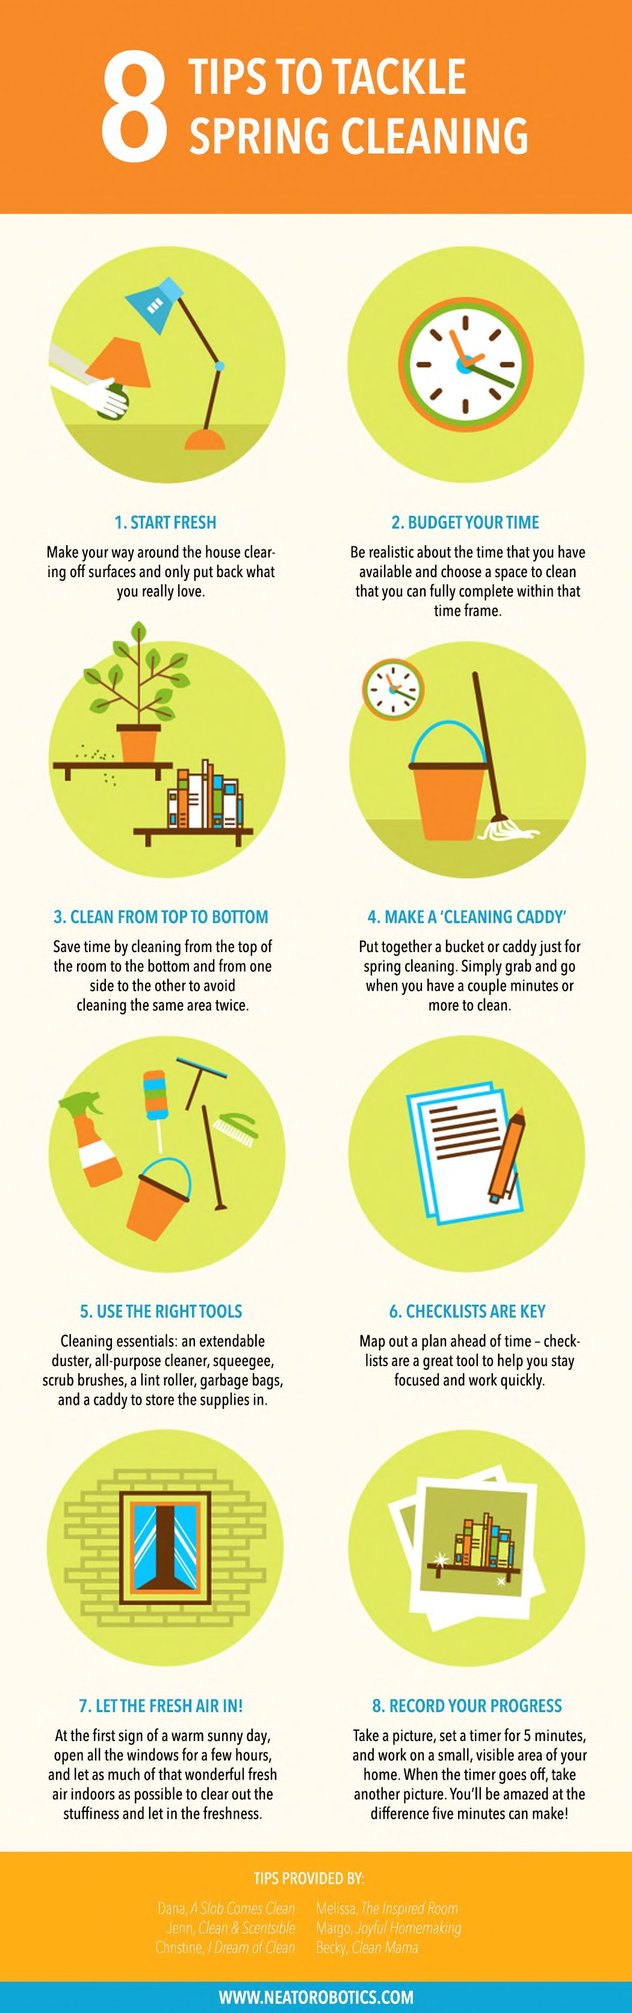 https://info.firstcoasthomepros.com/hs-fs/hubfs/Spring-Cleaning-Infographic.jpg?width=632&height=2013&name=Spring-Cleaning-Infographic.jpg